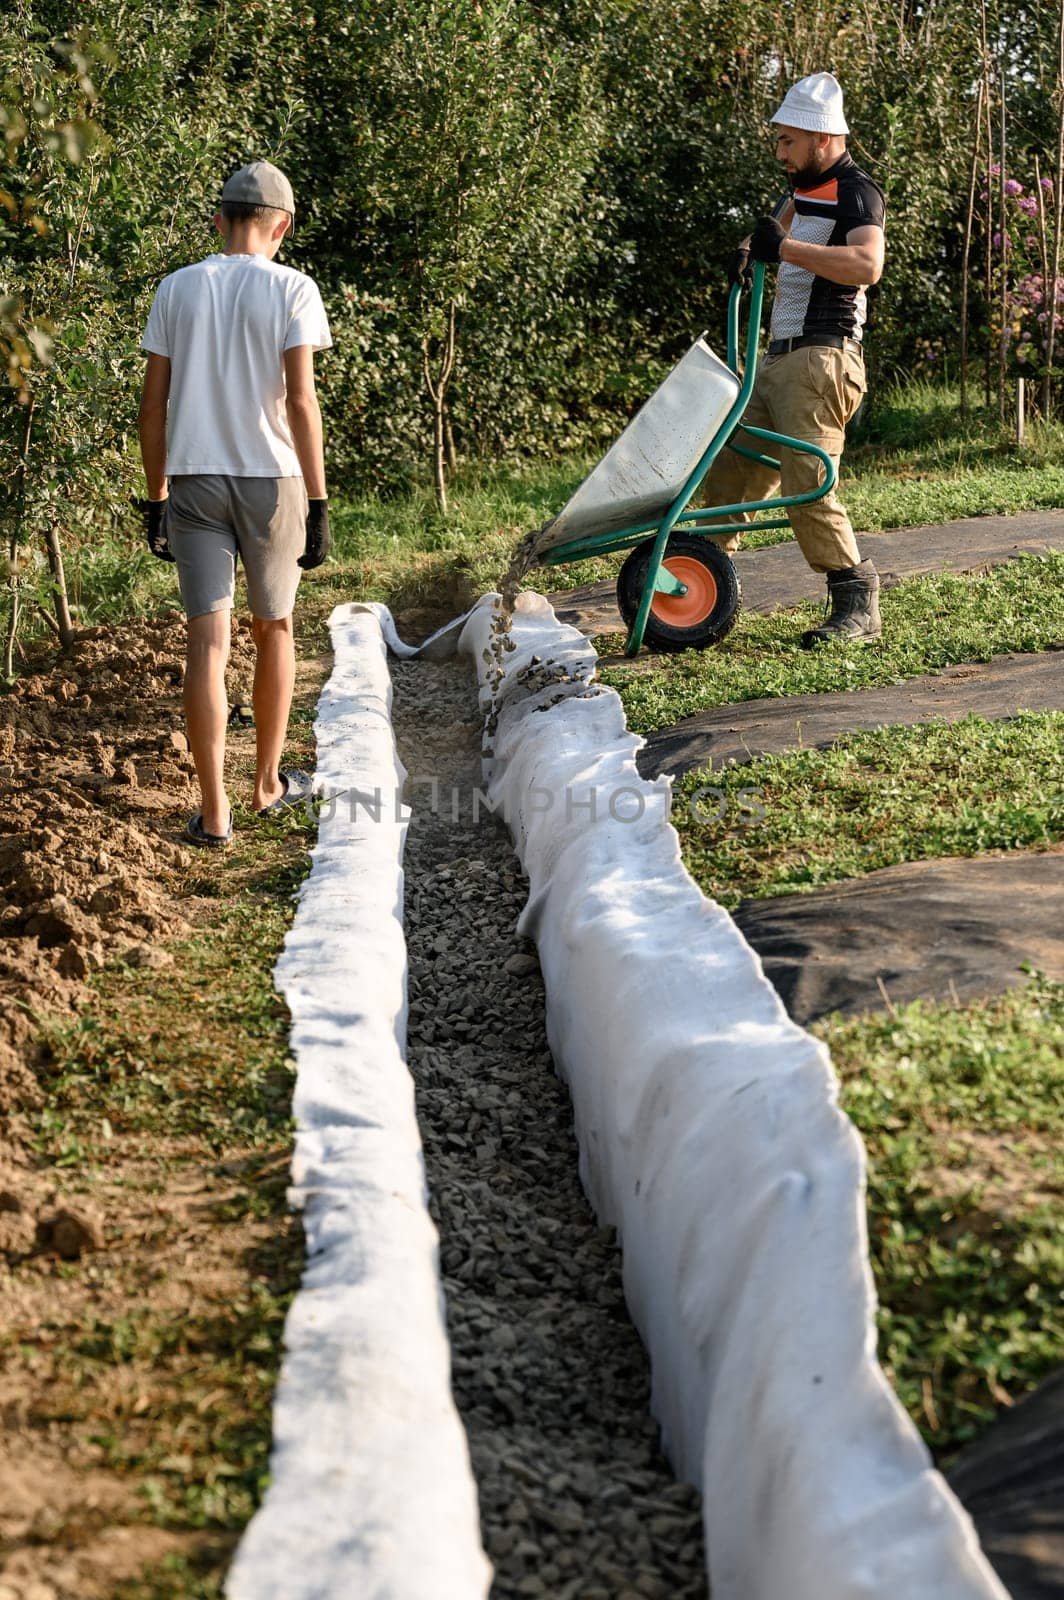 A man pours rubble crushed stone from a wheelbarrow into a trench. Drainage works for drainage of ground water around the field.